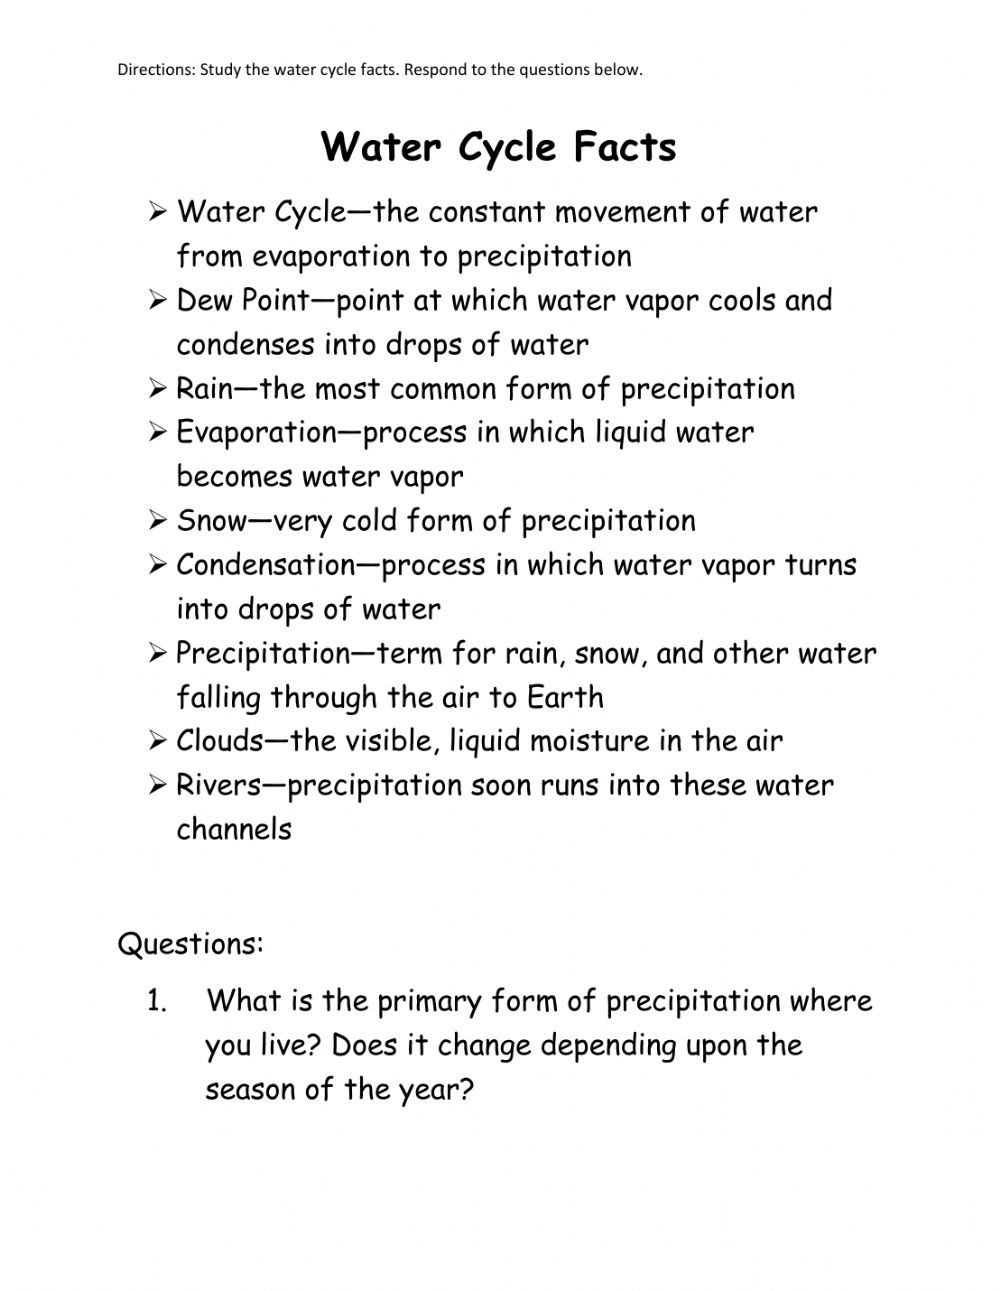 Water Cycle Worksheet Answer Key the Water Cycle Facts Interactive Worksheet